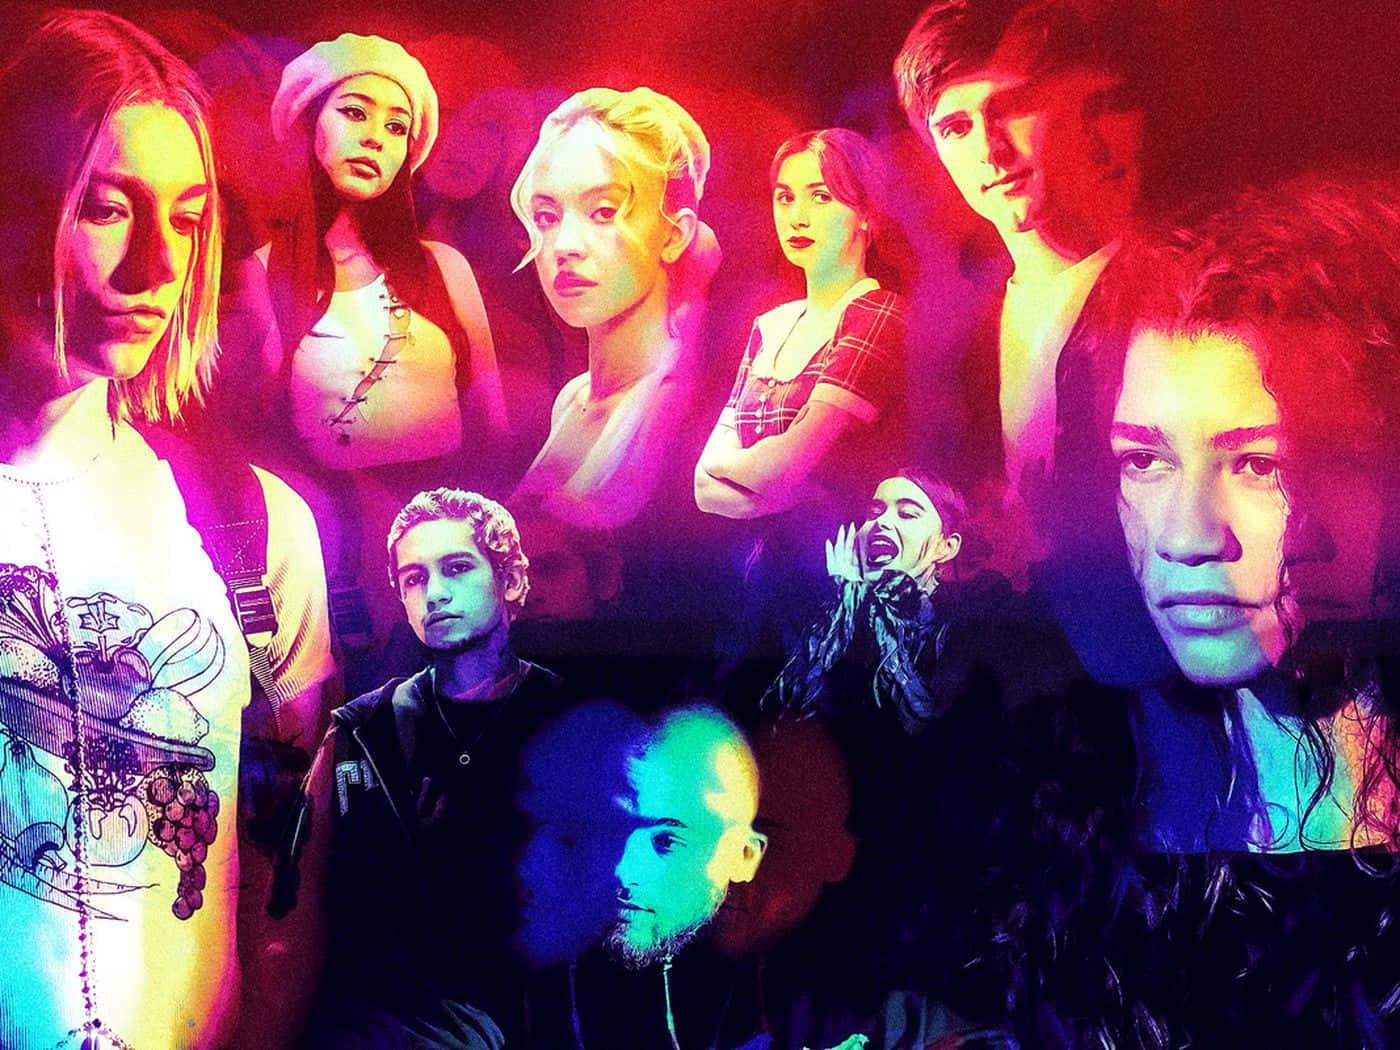 "The best is yet to come, get ready for Euphoria Season 2." Wallpaper